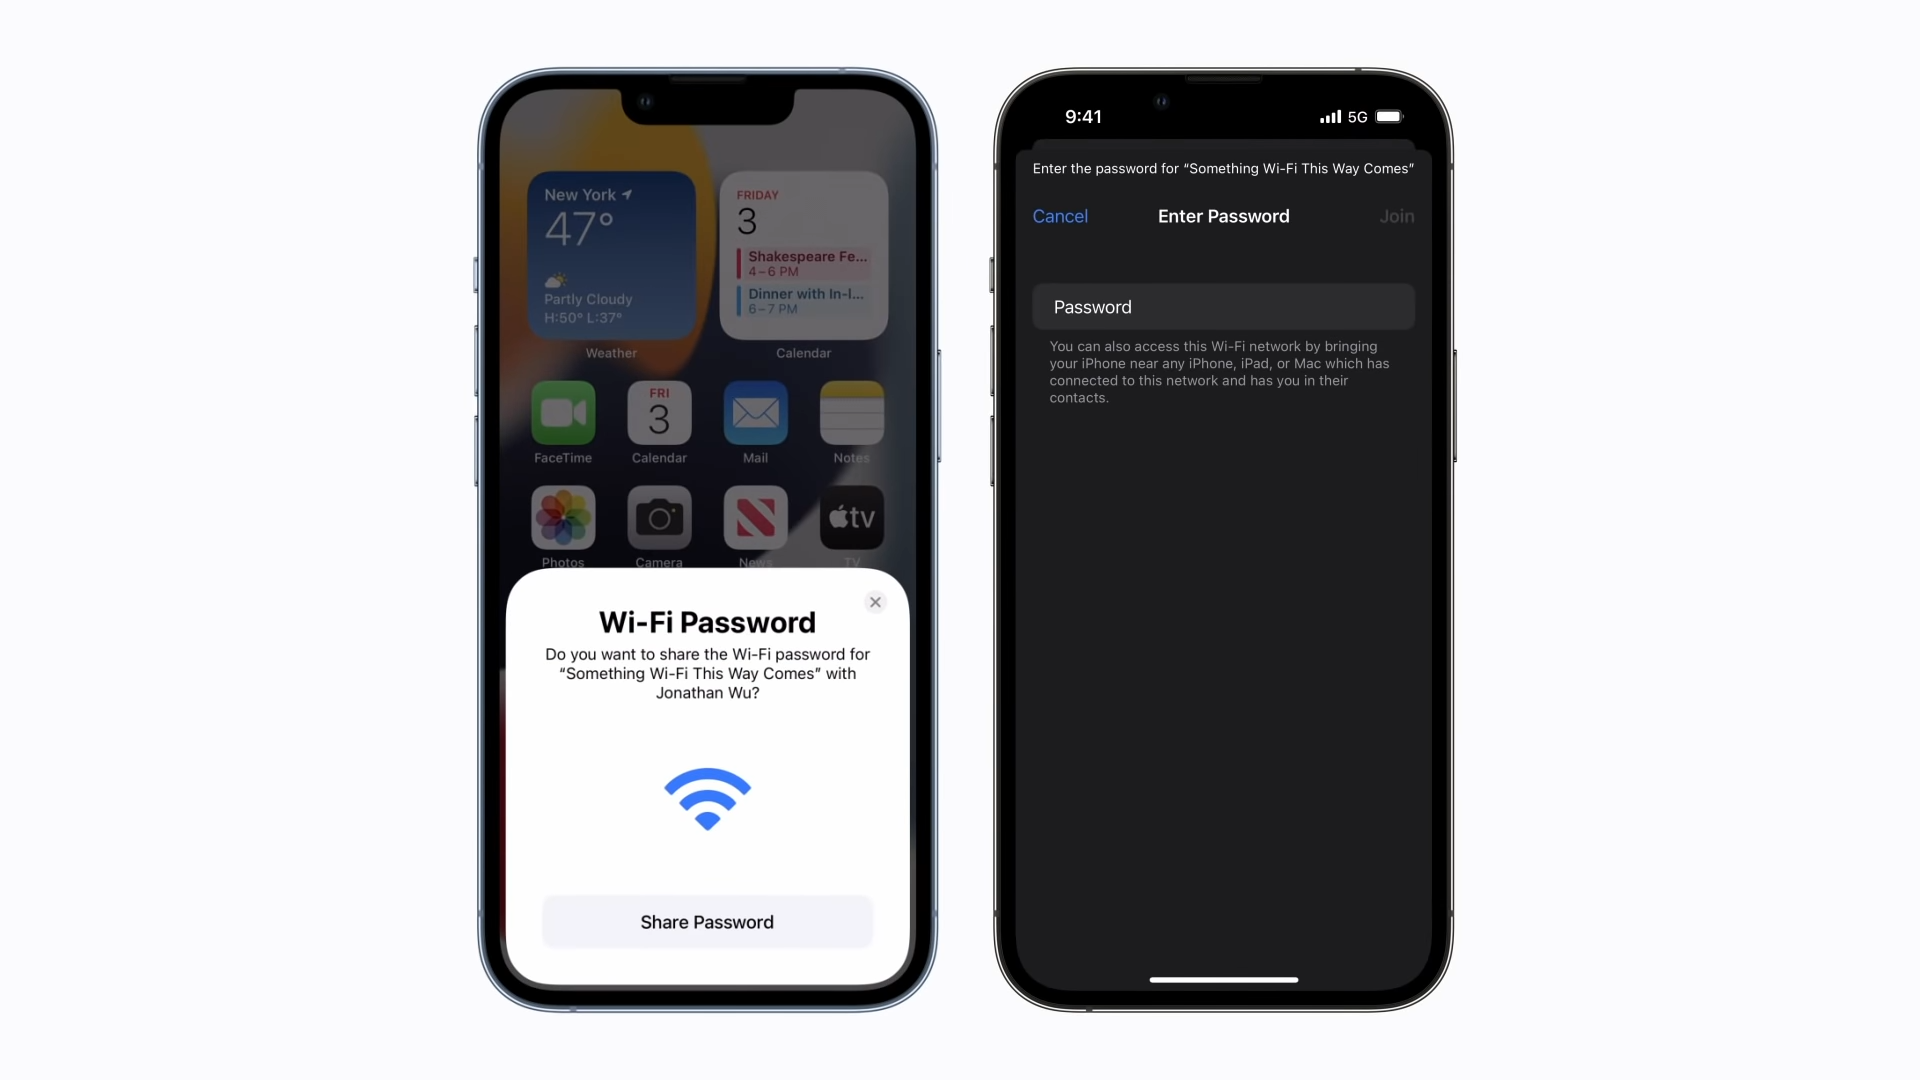 How to share Wi-Fi password from iPhone to iPhone